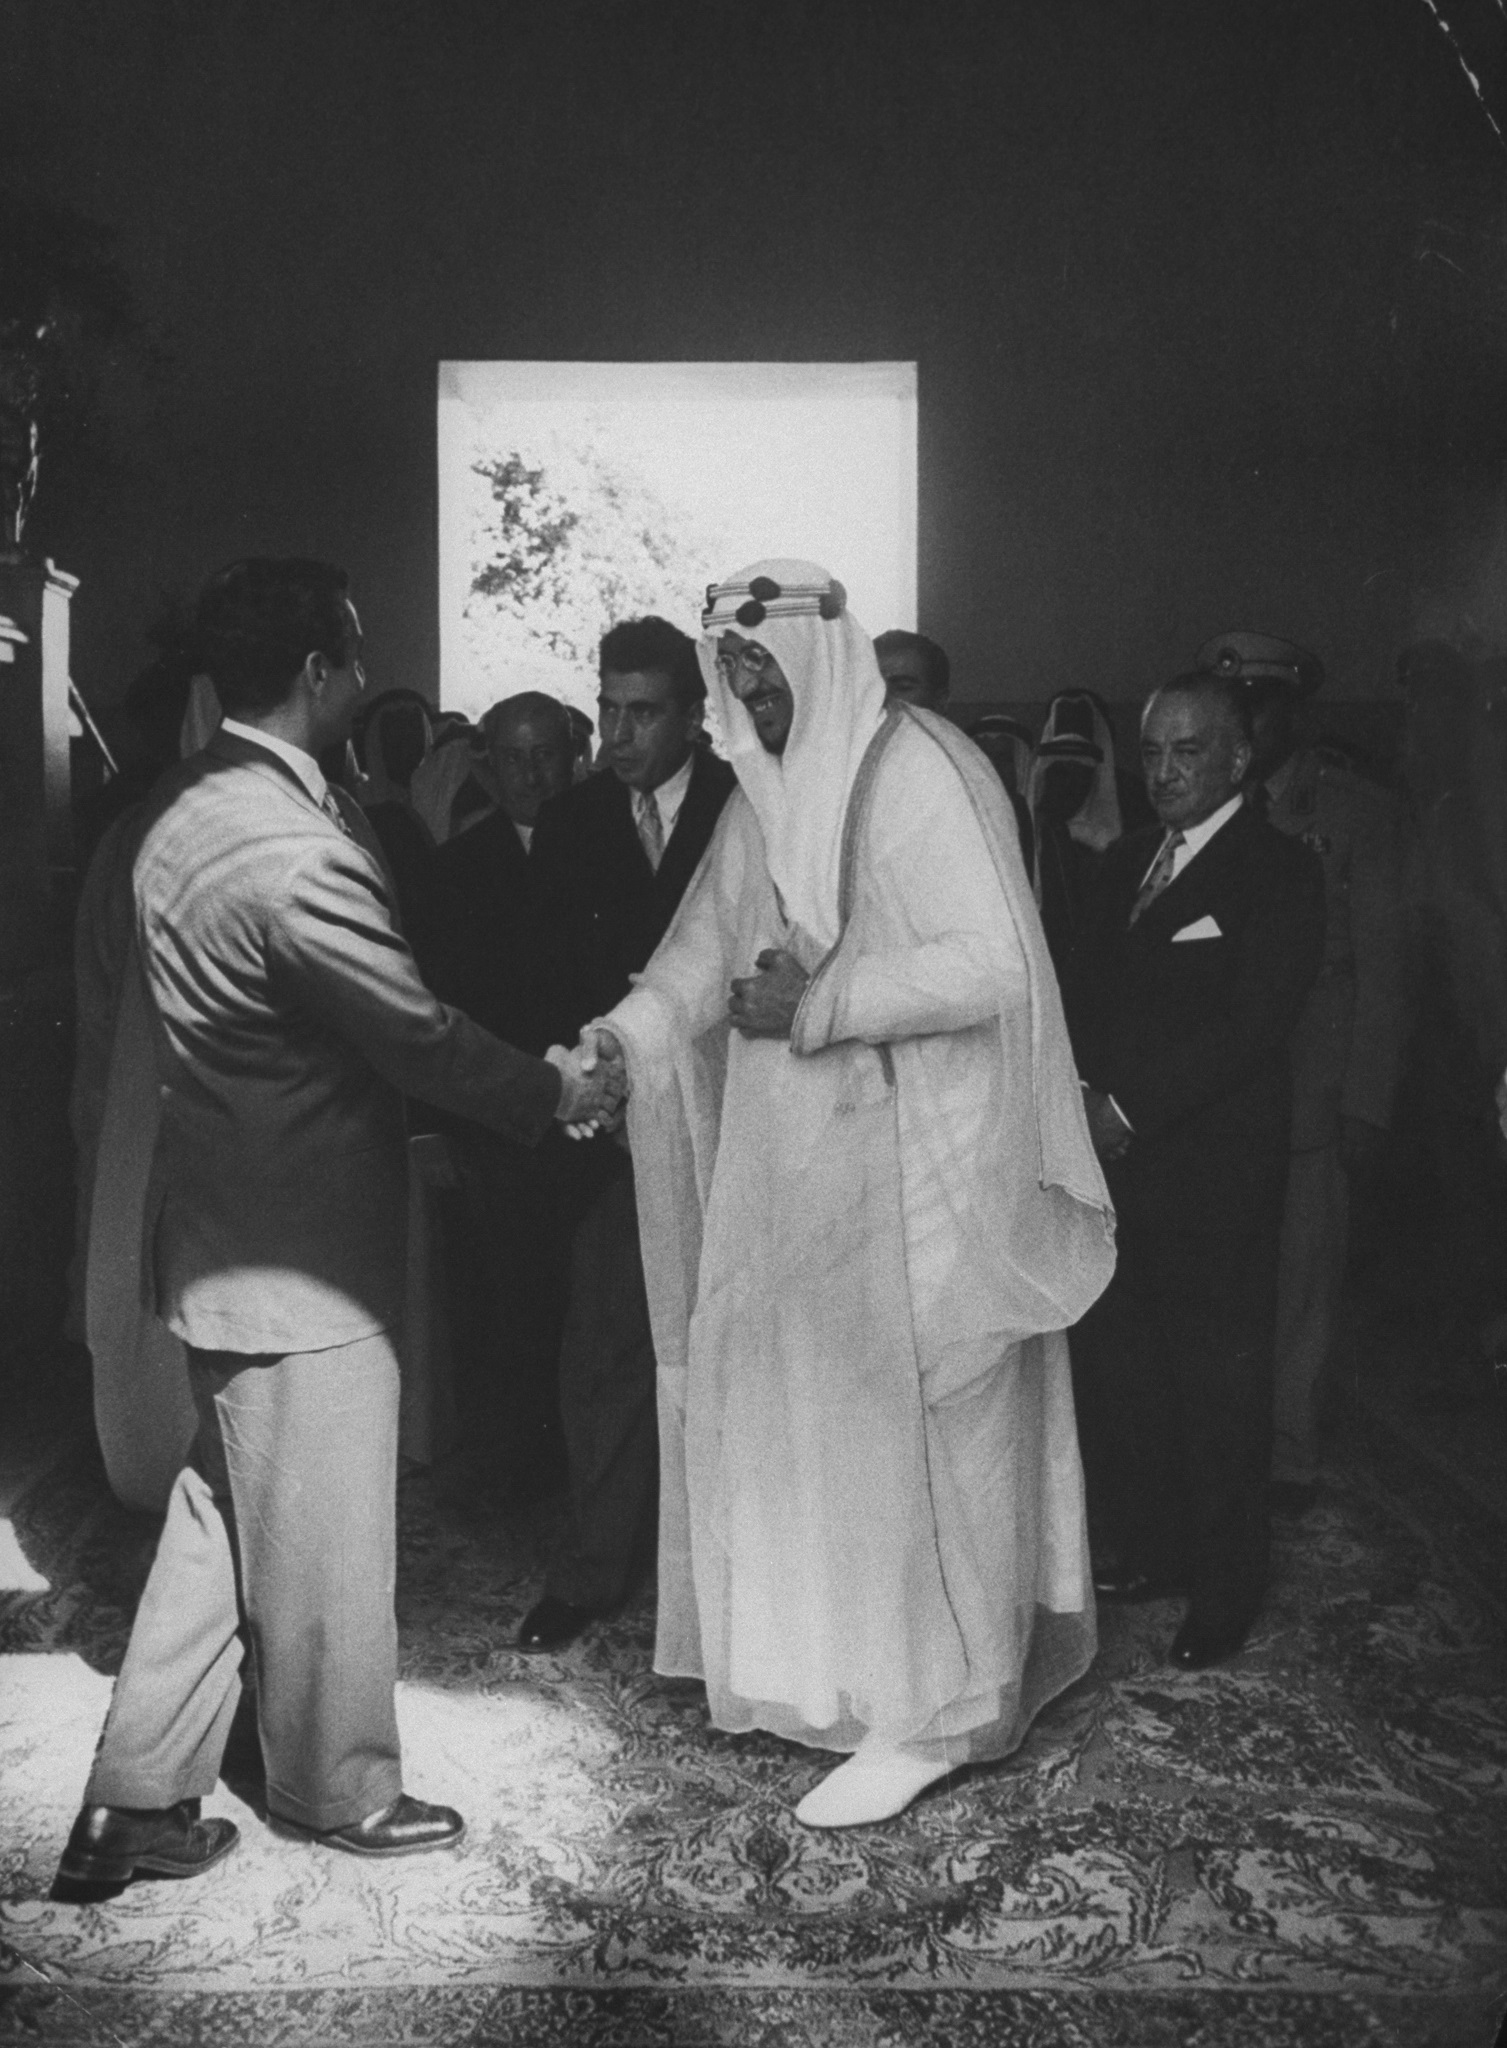 King Saud shaking hands with Shah Mohamed Resa during his visit to Iran. (Photo by James WhitmoreTime Life PicturesGetty Images)